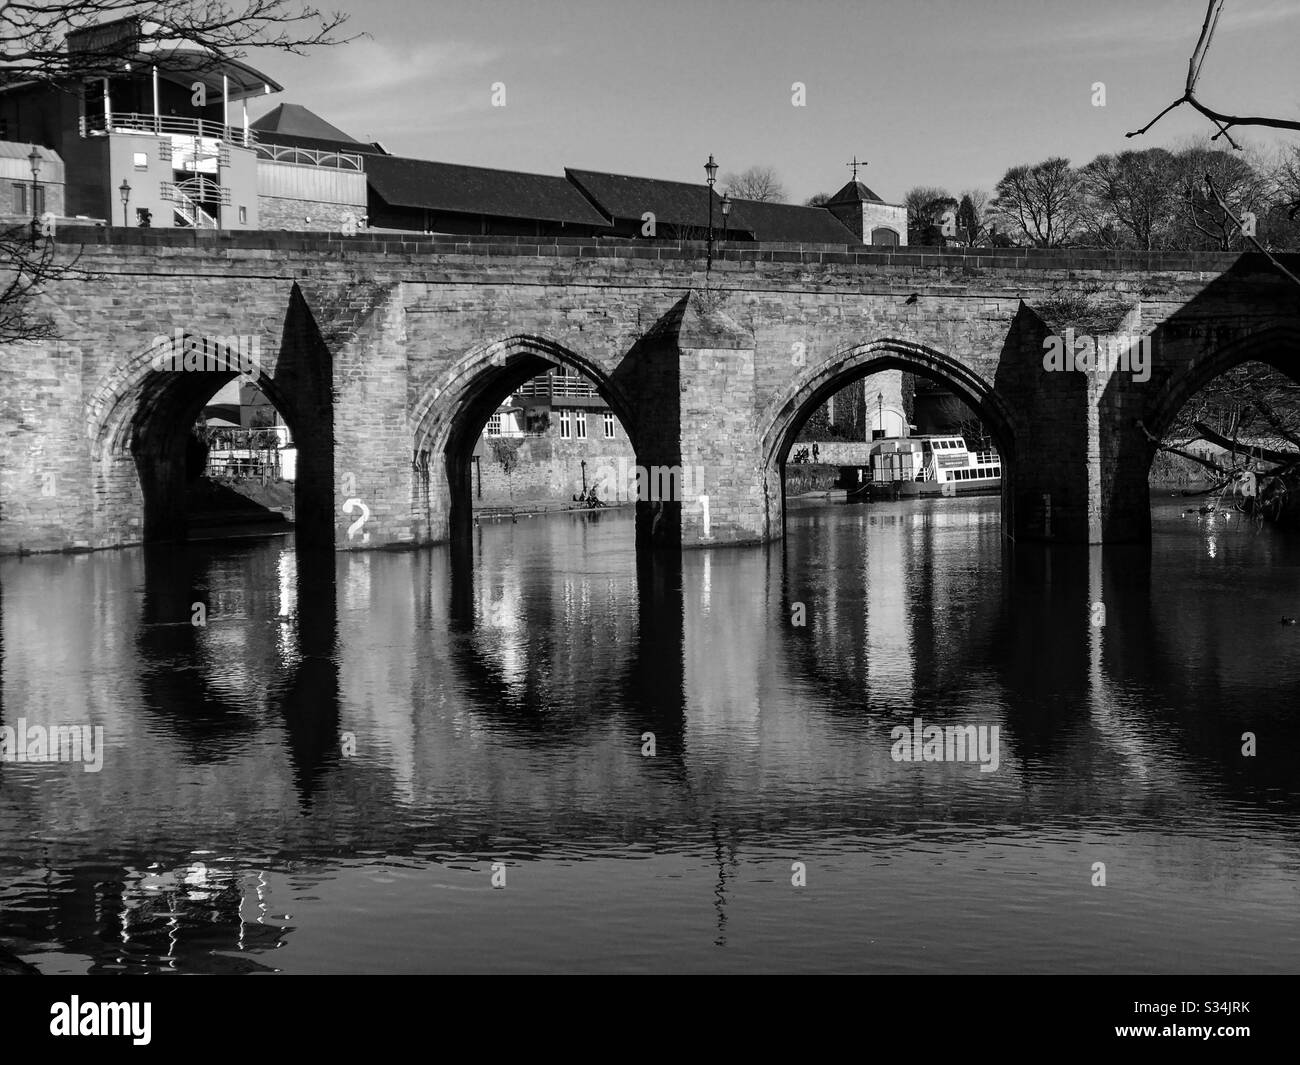 Architecture of Durham City, North East England. Scenic view of Elvet Bridge over the River Wear. Medieval masonry arch bridge. Stock Photo